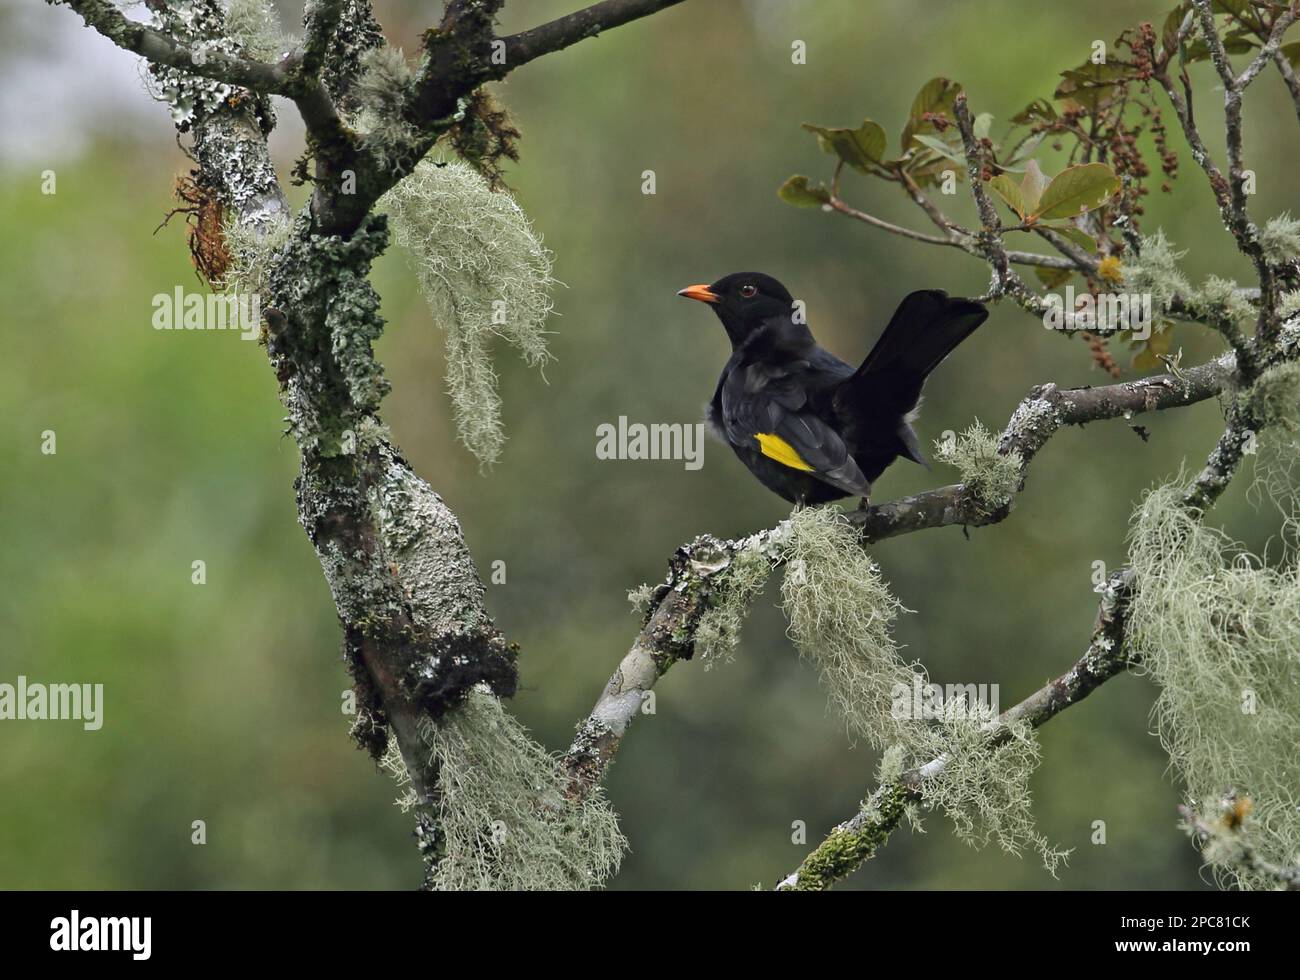 Black-and-gold cotinga (Tijuca atra), adult male, tail spread, sitting on a lichen-covered branch, Atlantic rainforest, Brazil Stock Photo